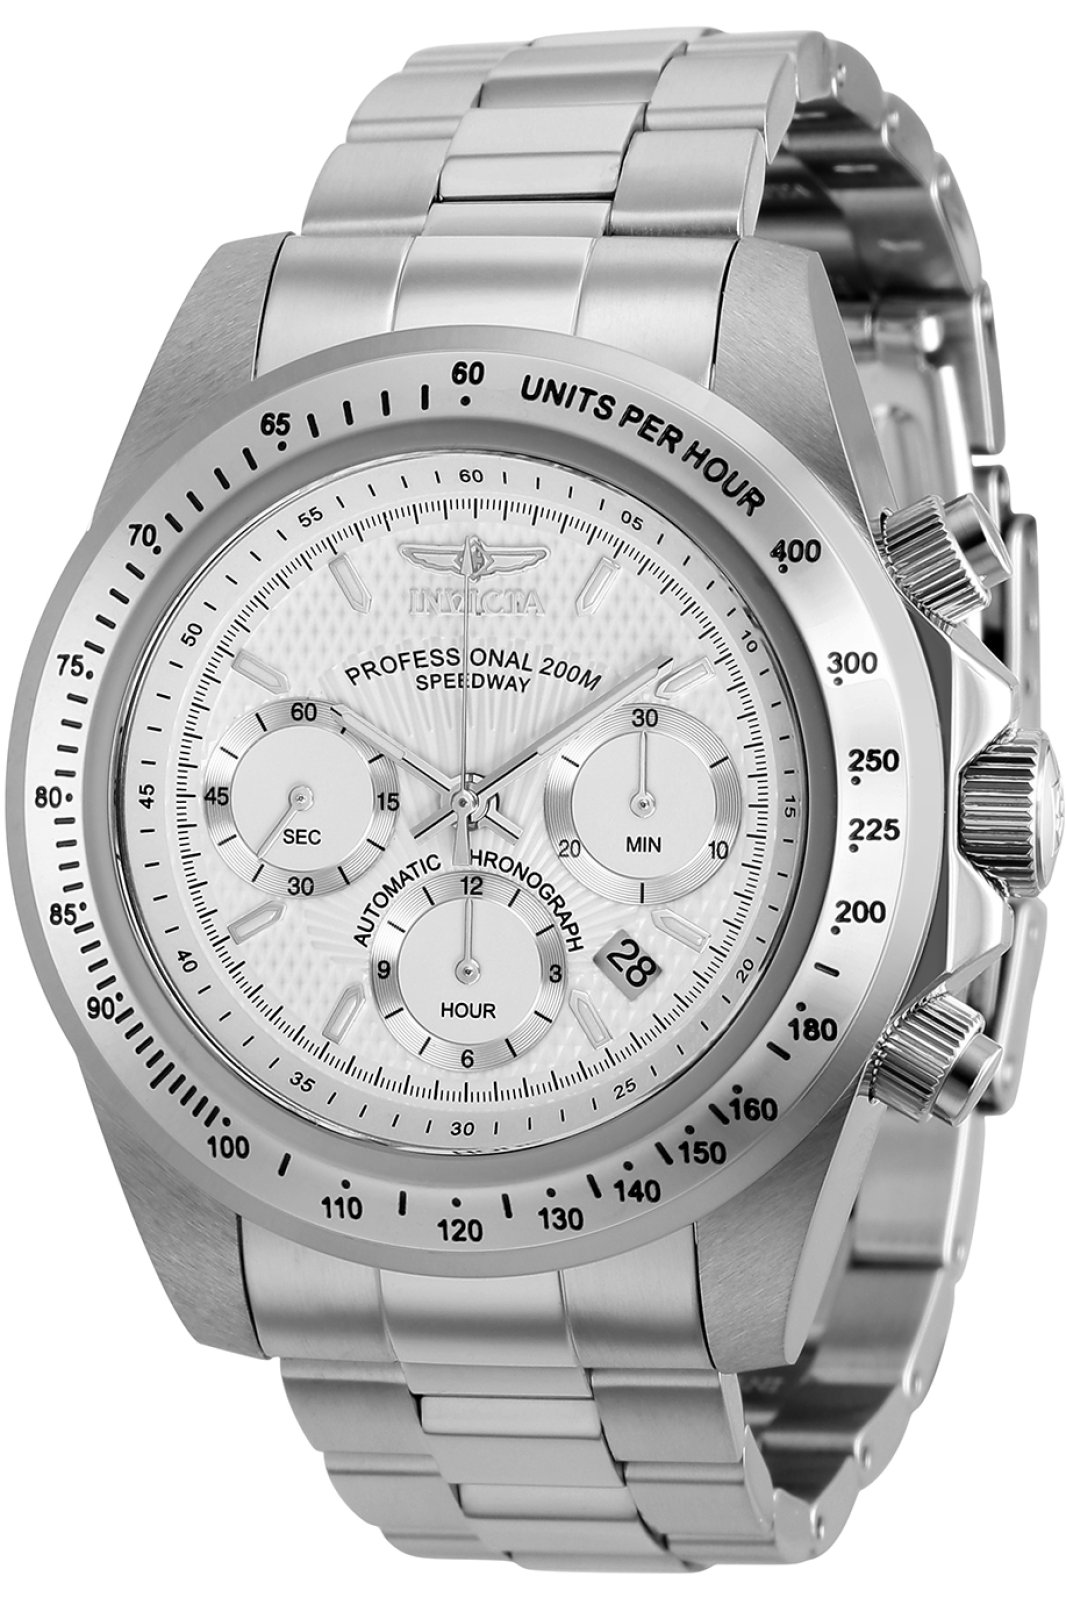 Invicta Speedway - Limited Edition 39071 Men's Automatic Watch - 45mm